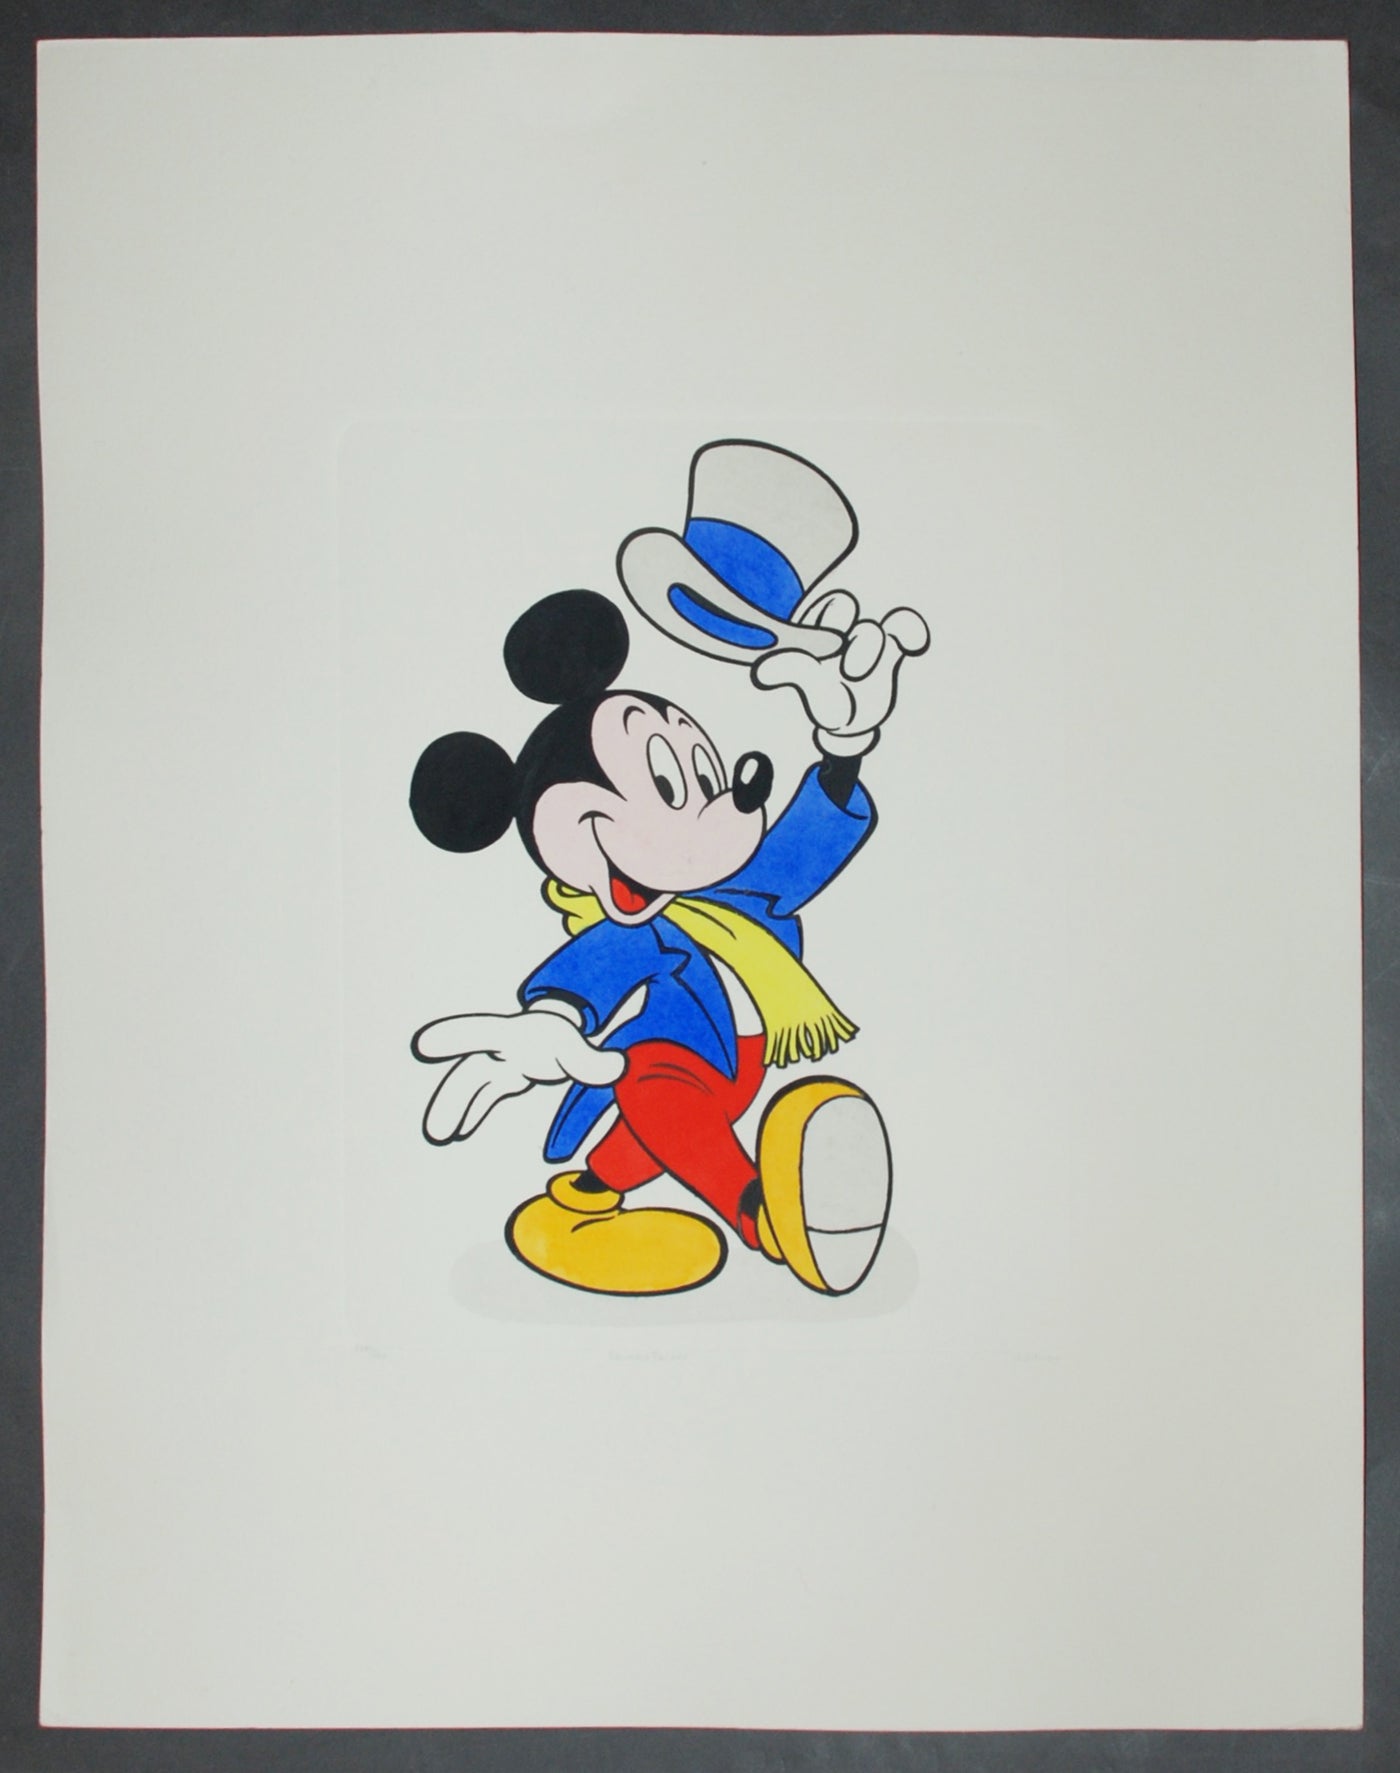 Disney Animation Art Hand Colored Etching Featuring Mickey Mouse